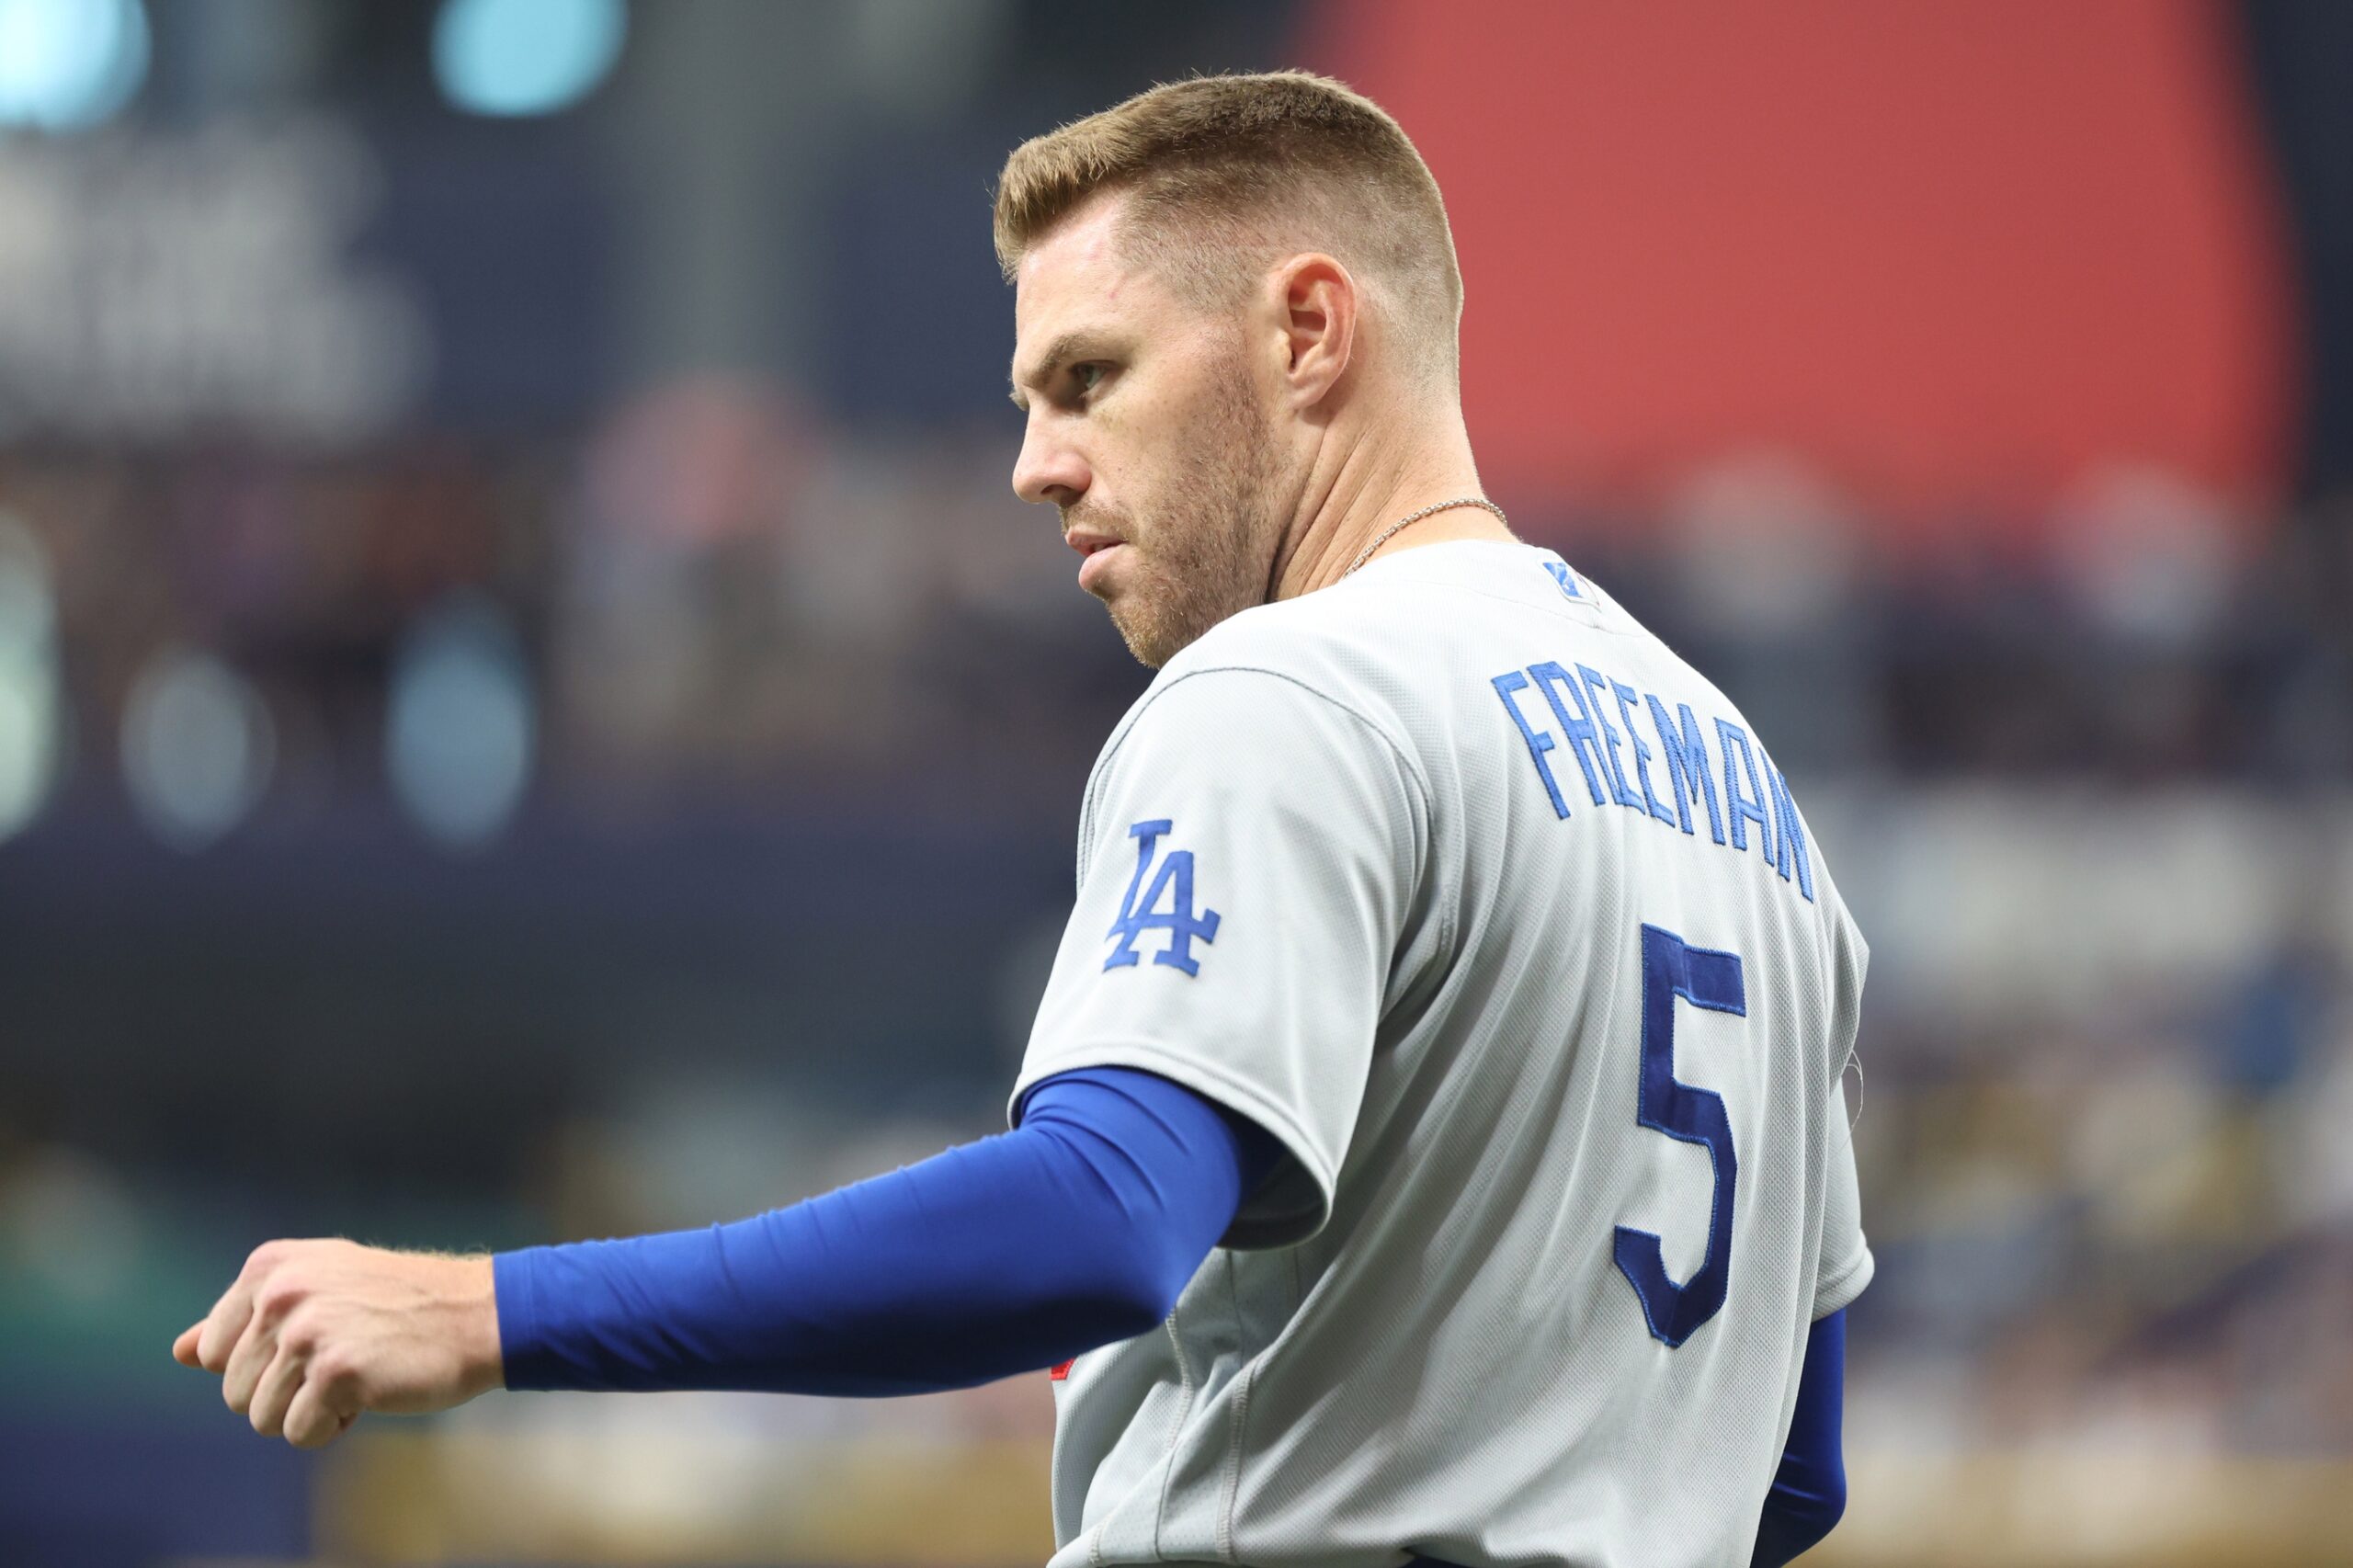 Dodgers’ Freddie Freeman Gets Honest About His Early Season Struggles